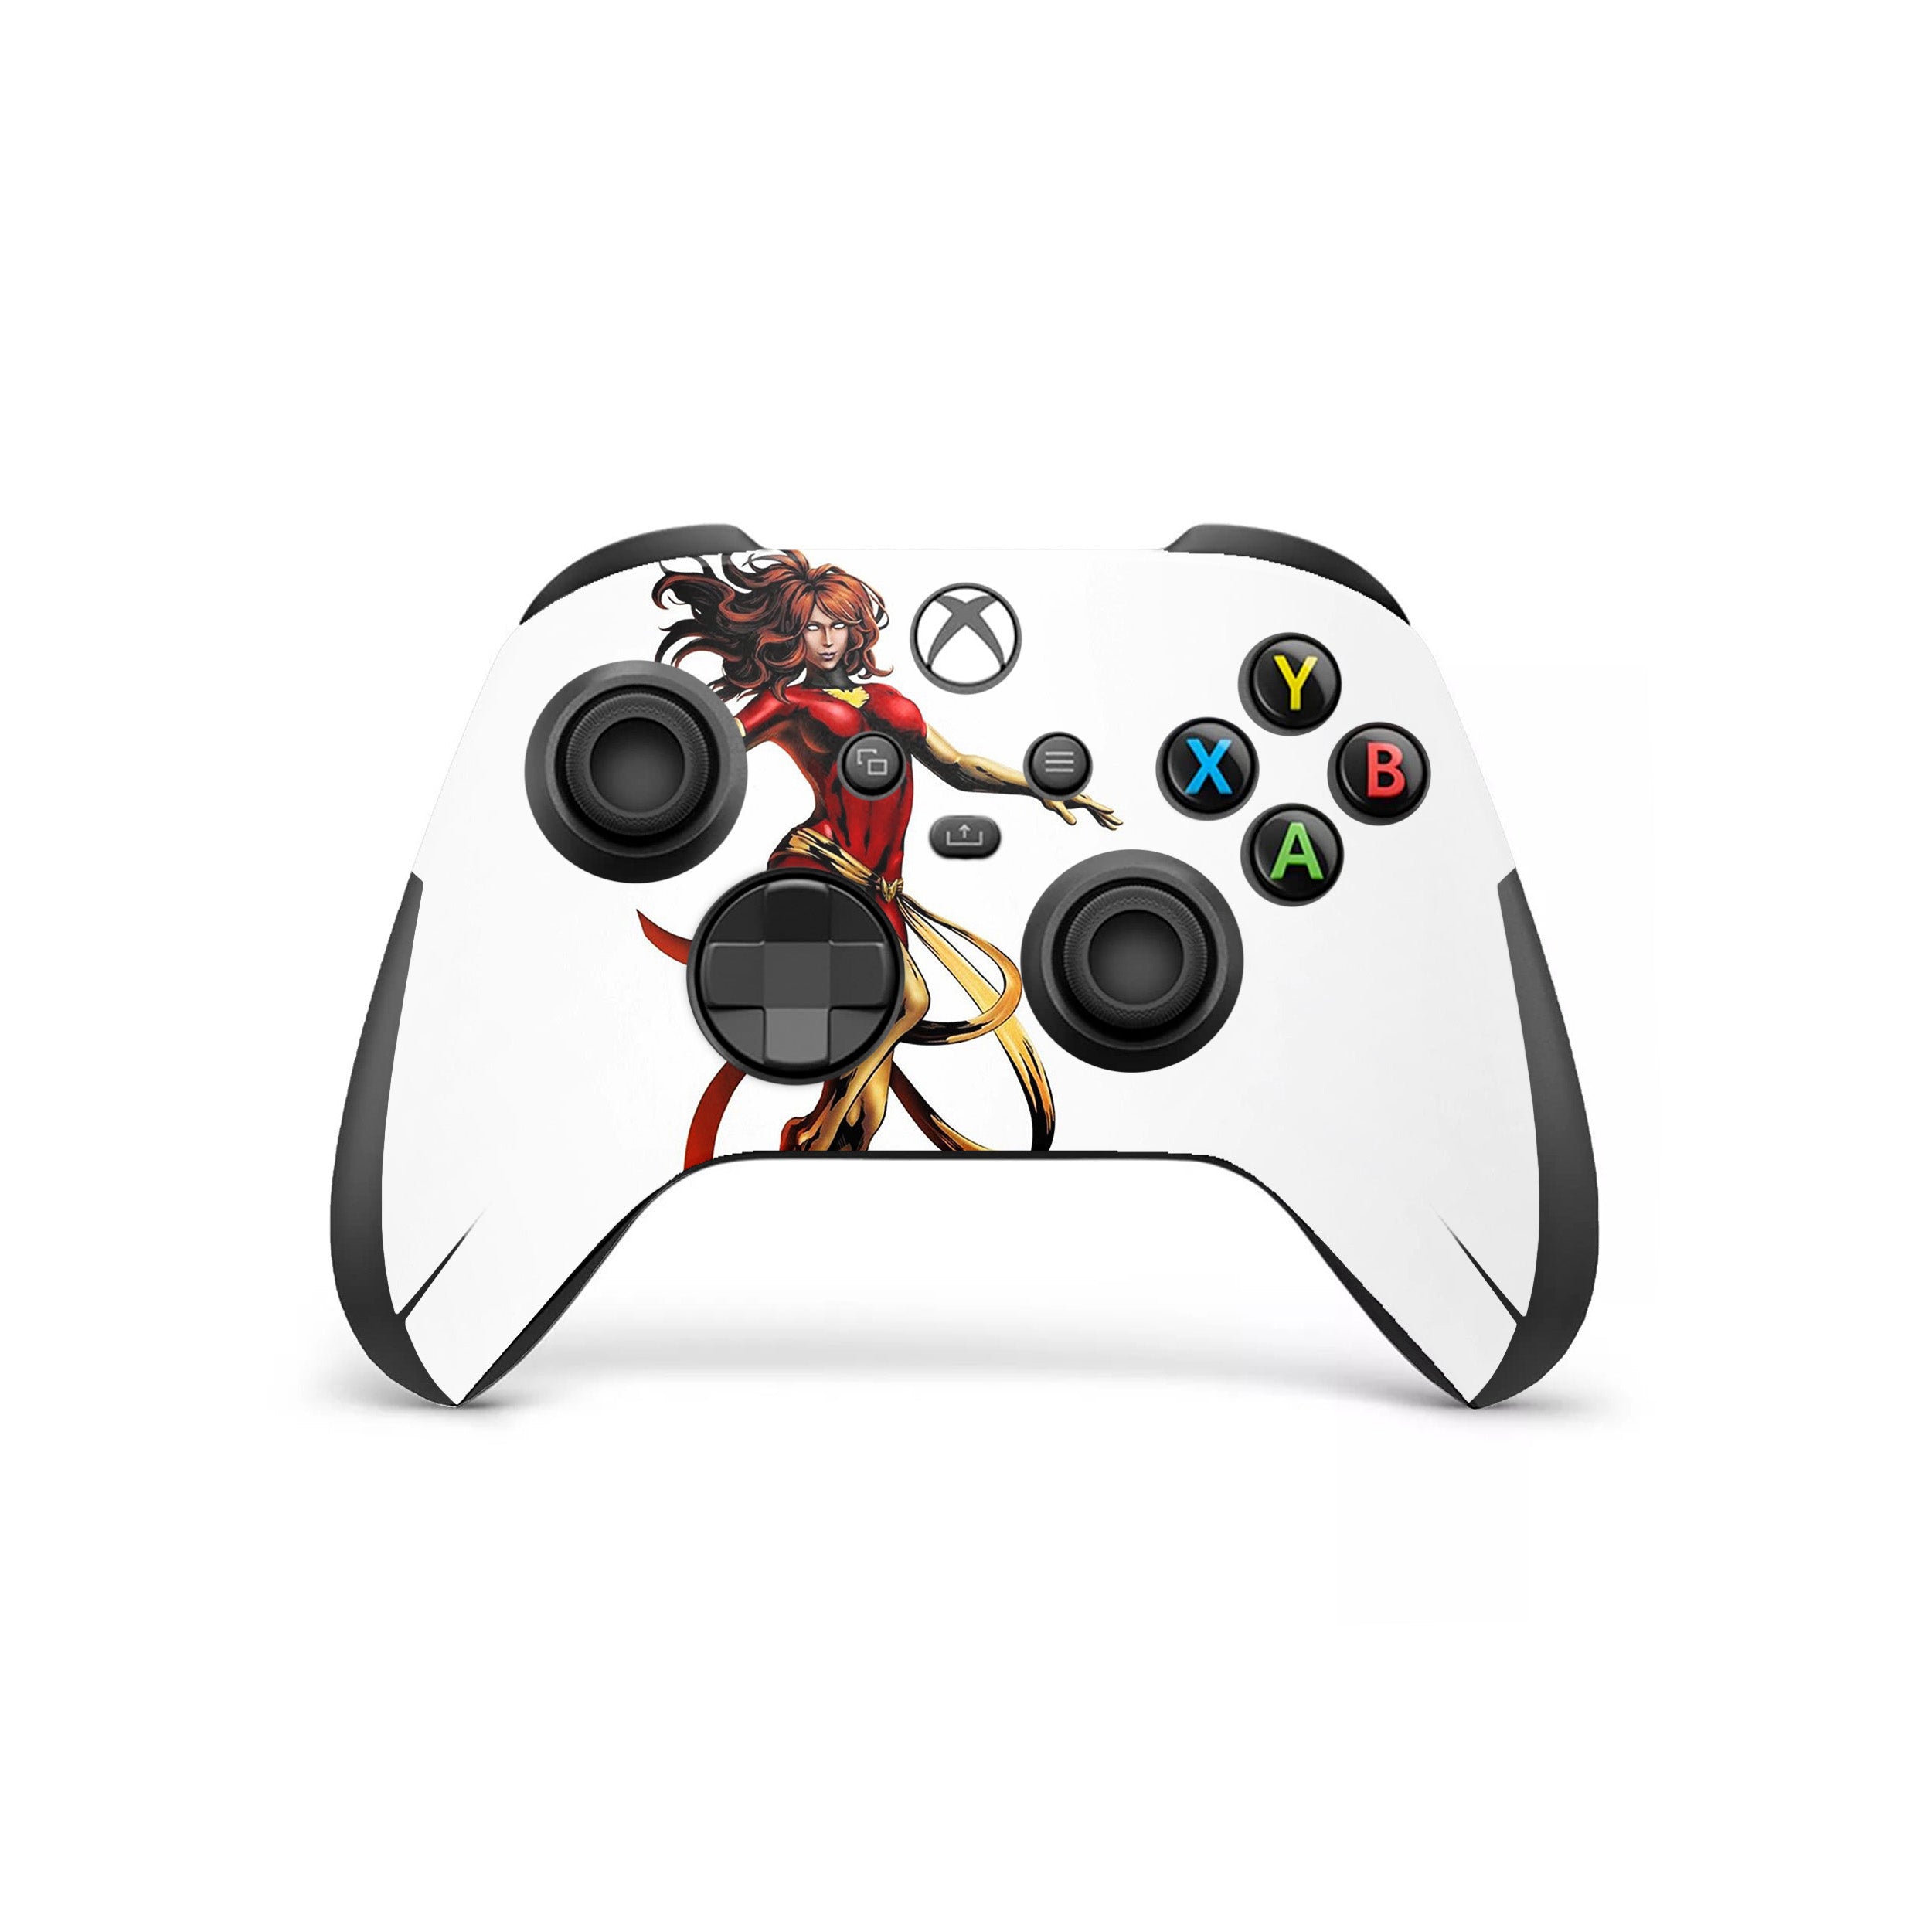 A video game skin featuring a Marvel X Men Phoenix design for the Xbox Wireless Controller.